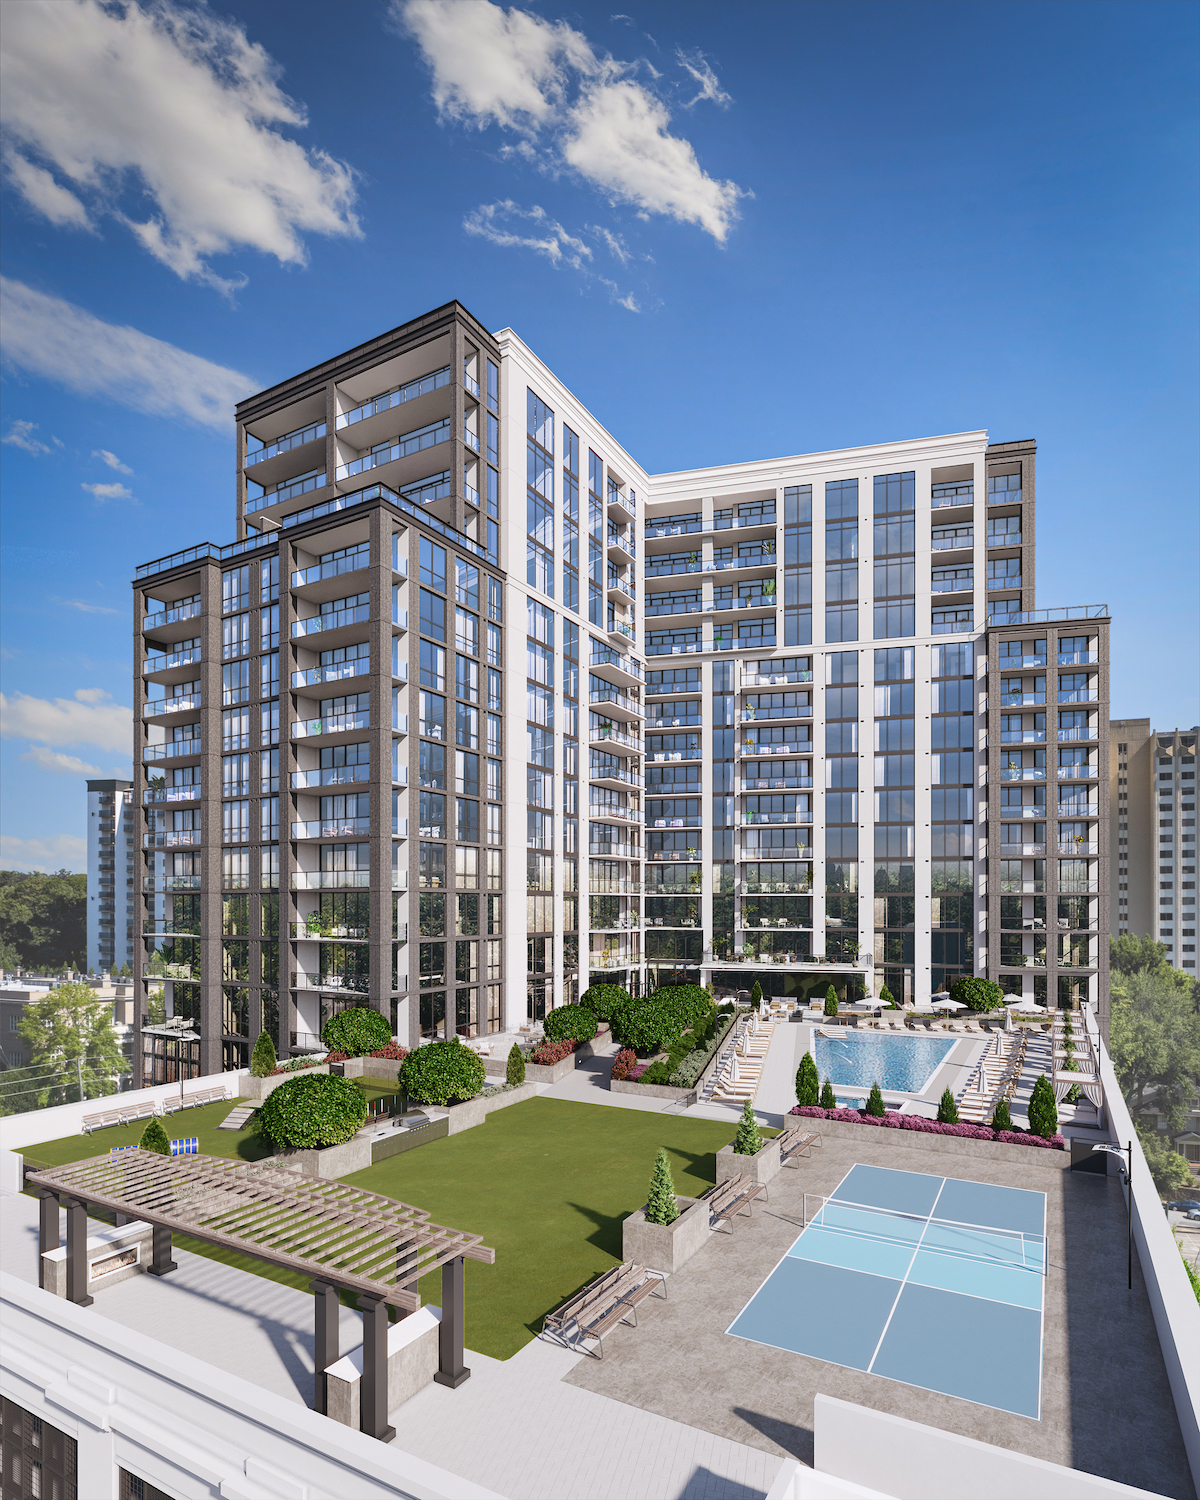 Ground Breaks on The Dillon Buckhead, an 18-Story Condo Tower - Rendering 1